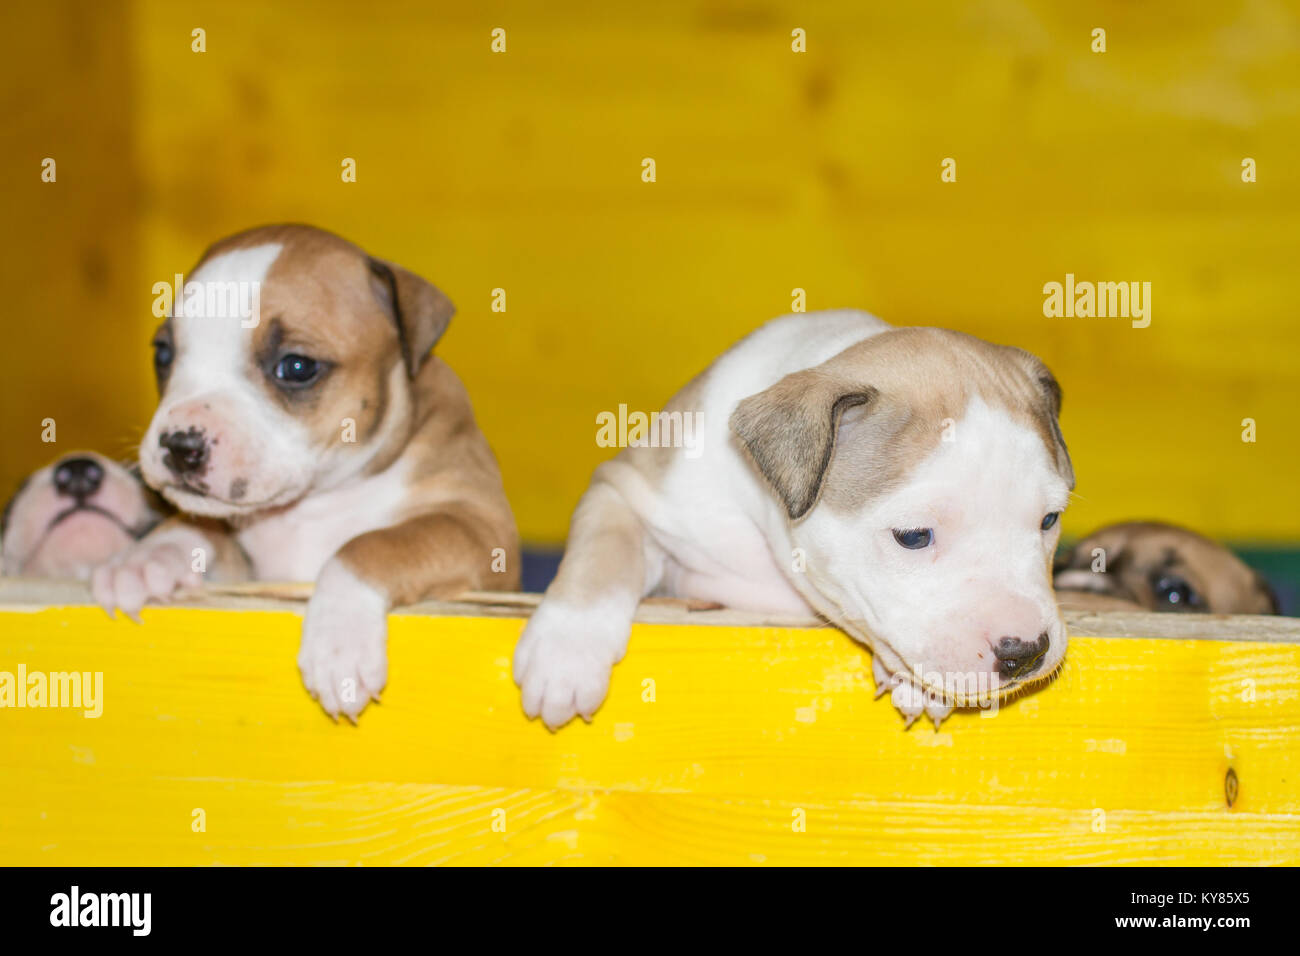 3 weeks old dog puppies Stock Photo